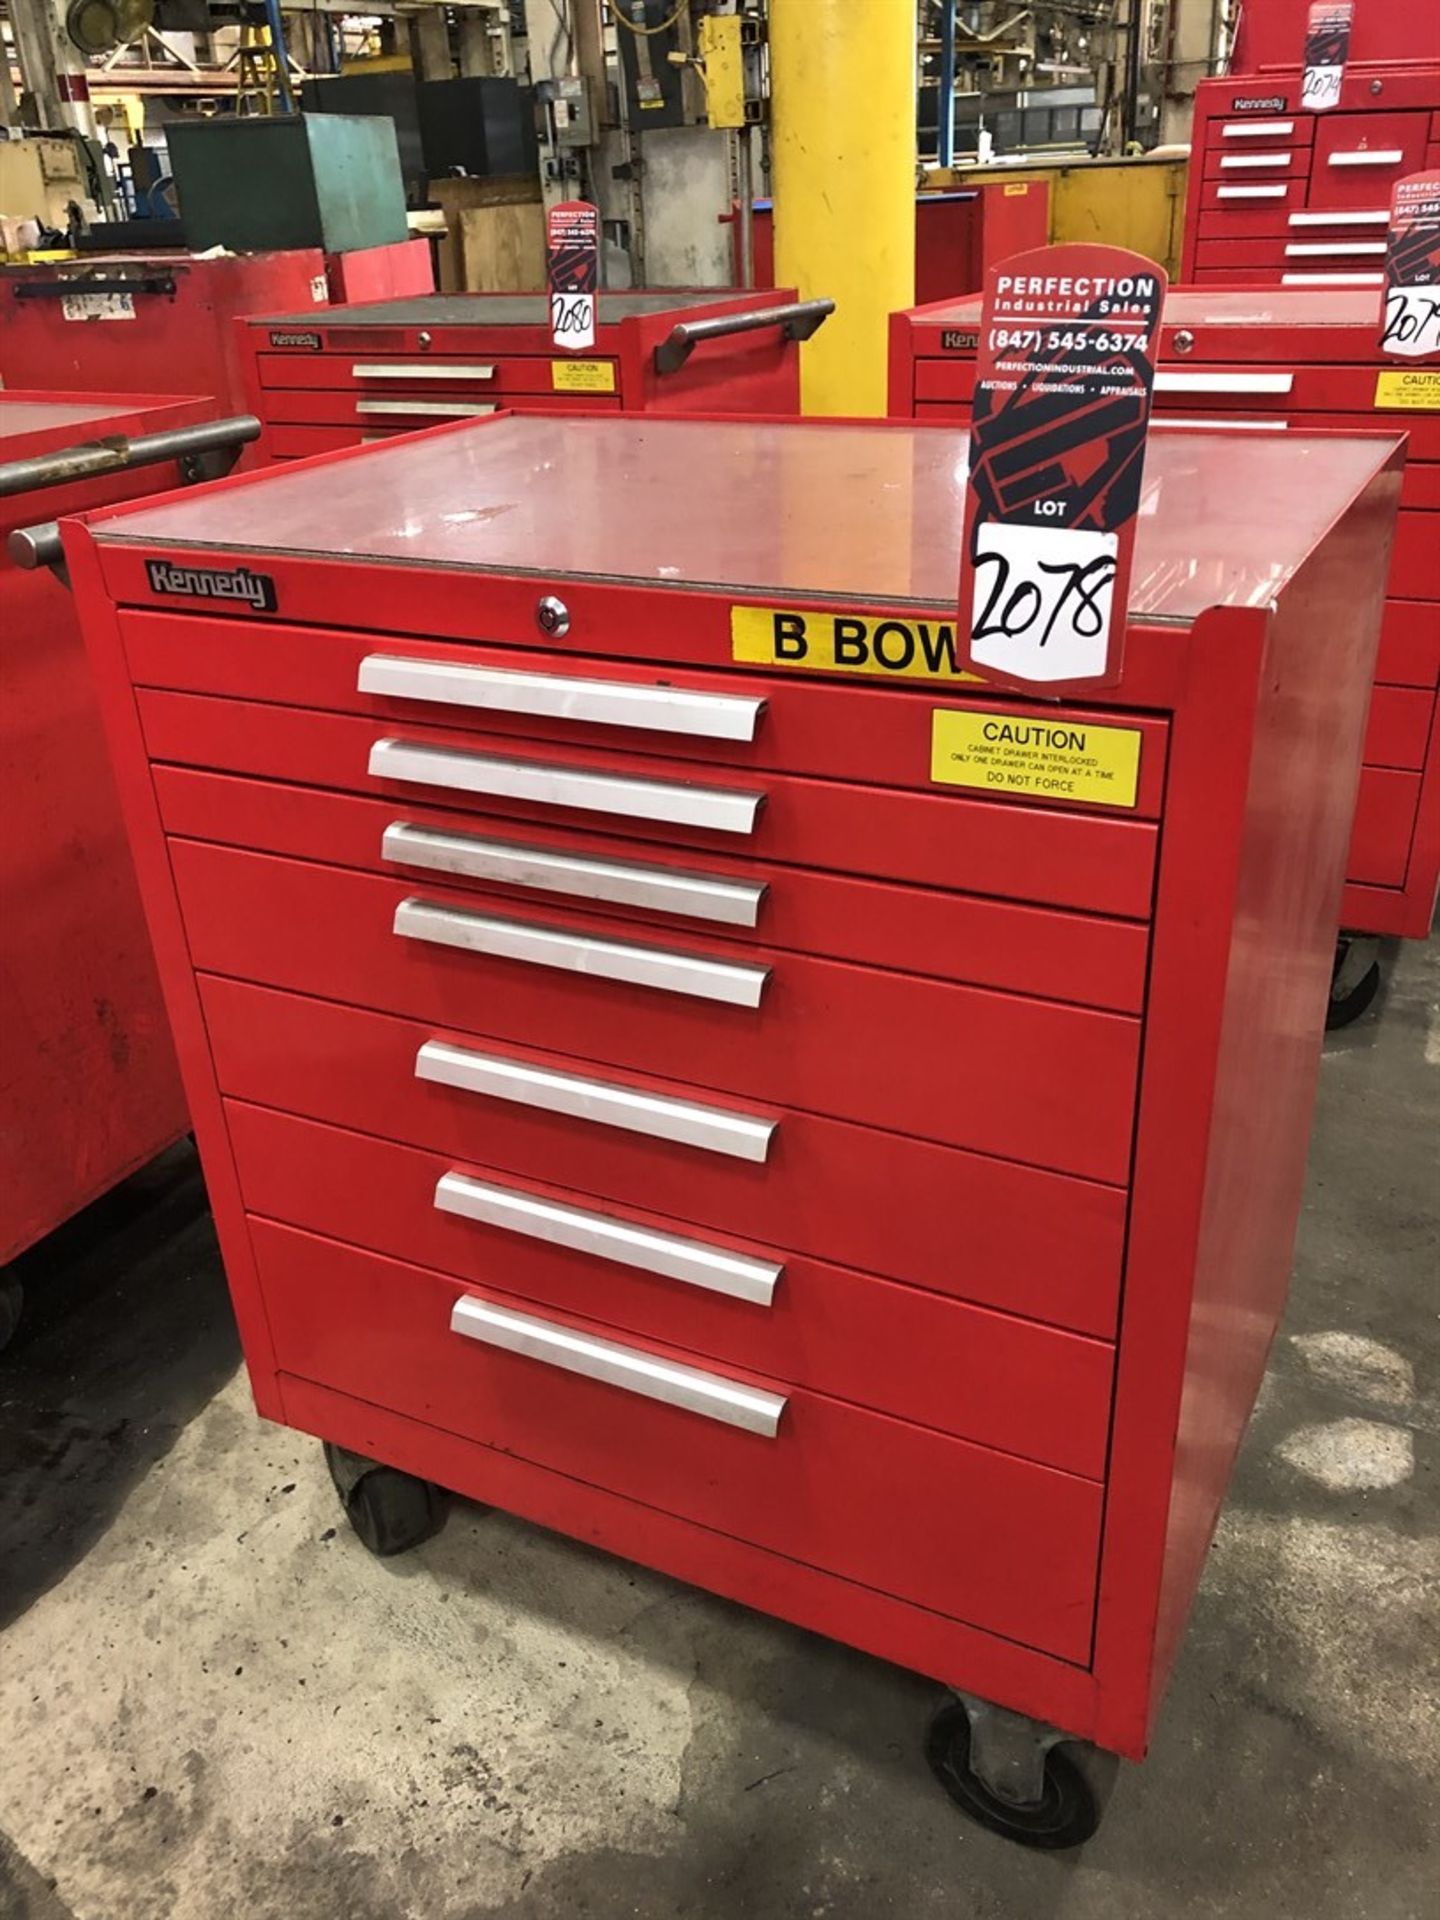 Kennedy Rolling Tool Chest, (13H)